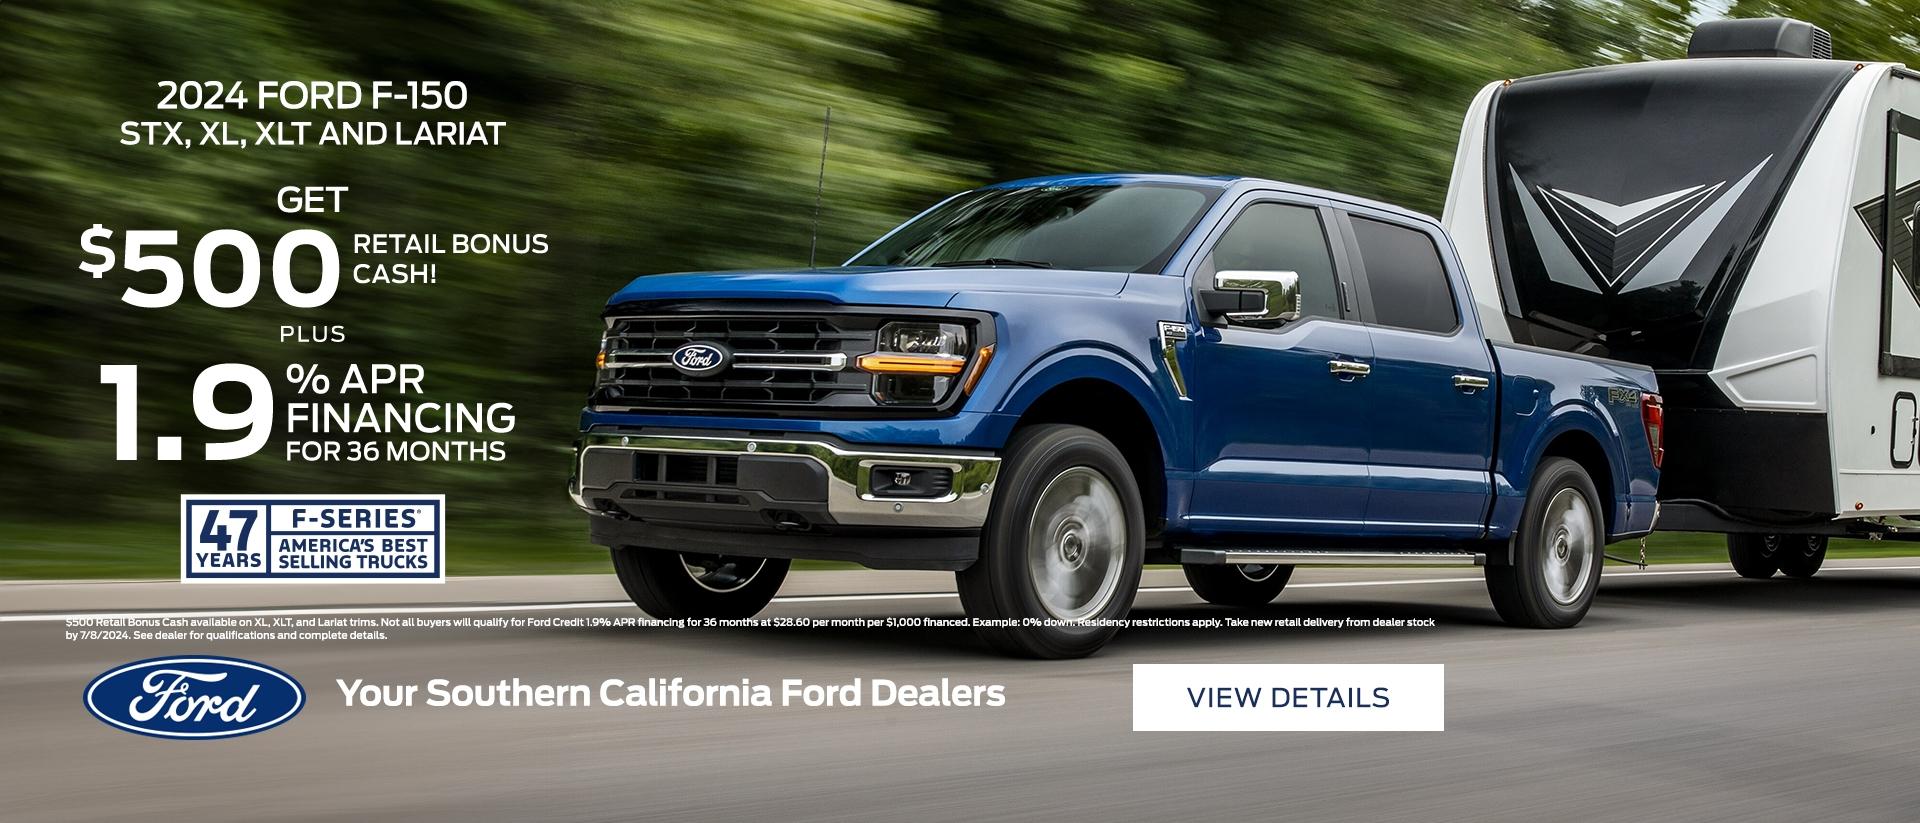 2024 Ford F-150 Purchase Offer | Southern California Ford Dealers